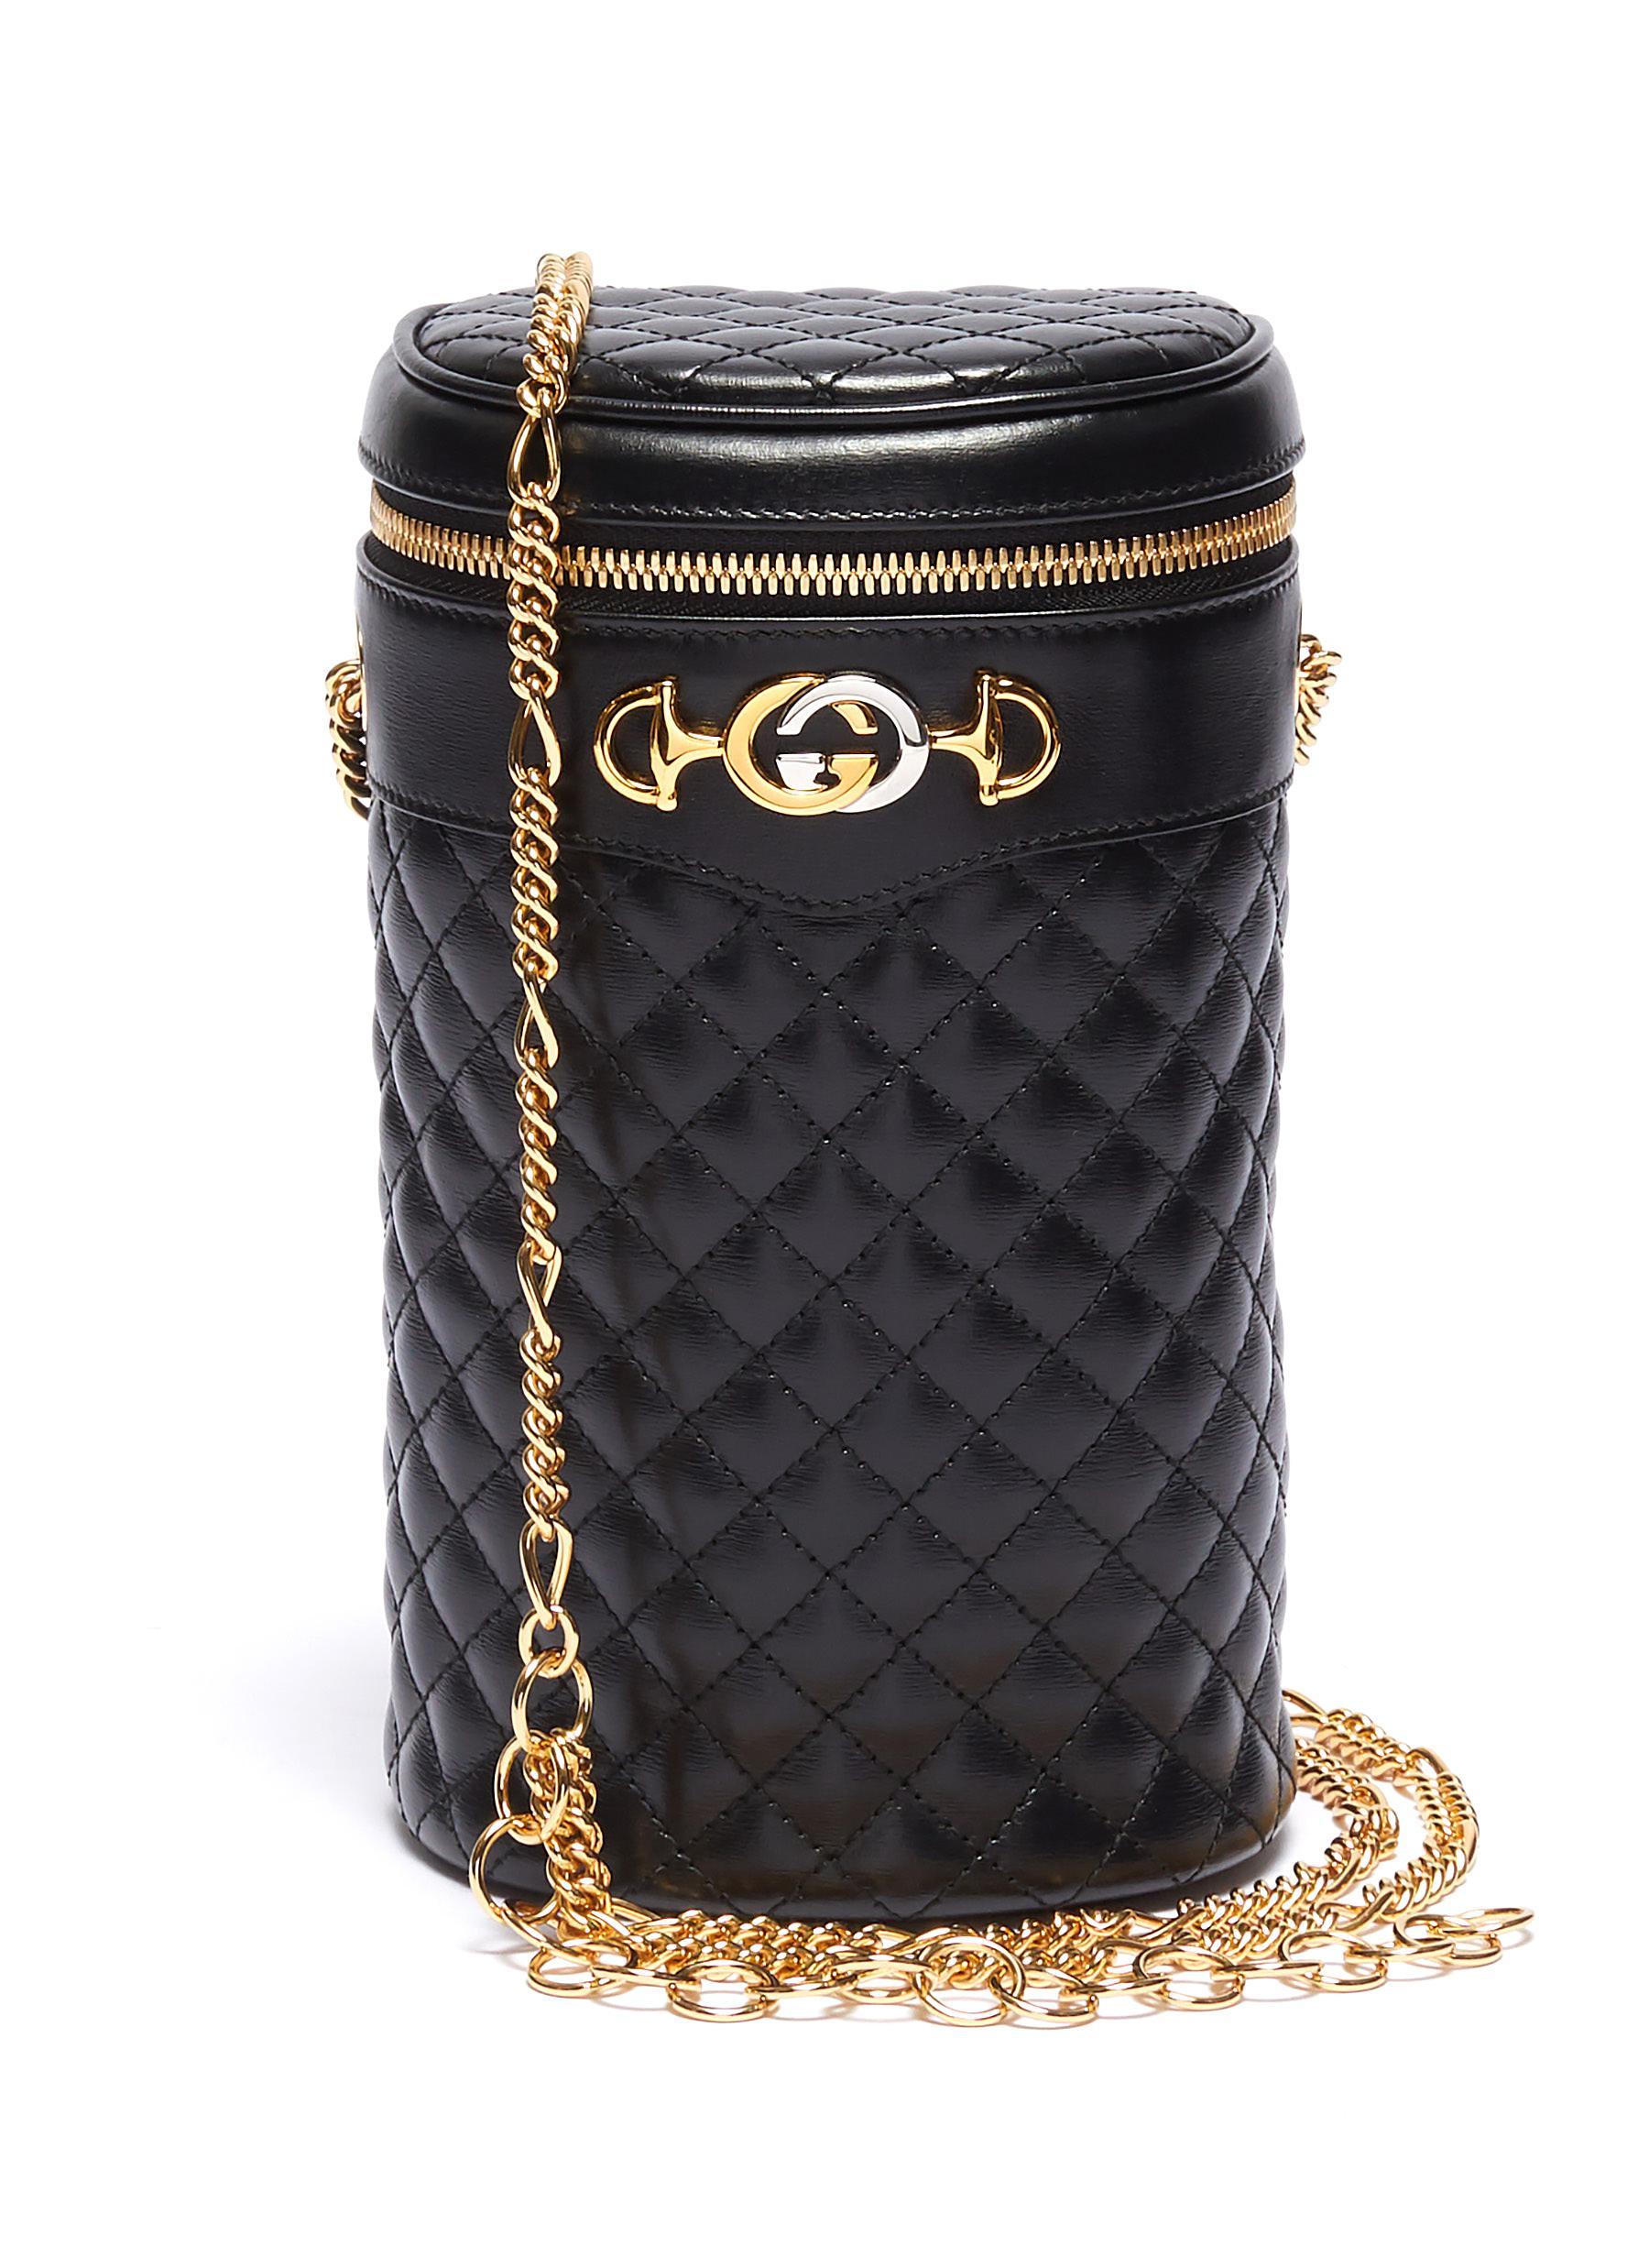 Gucci GG Horsebit Quilted Leather Chain Belt Bag in Black for Men - Lyst